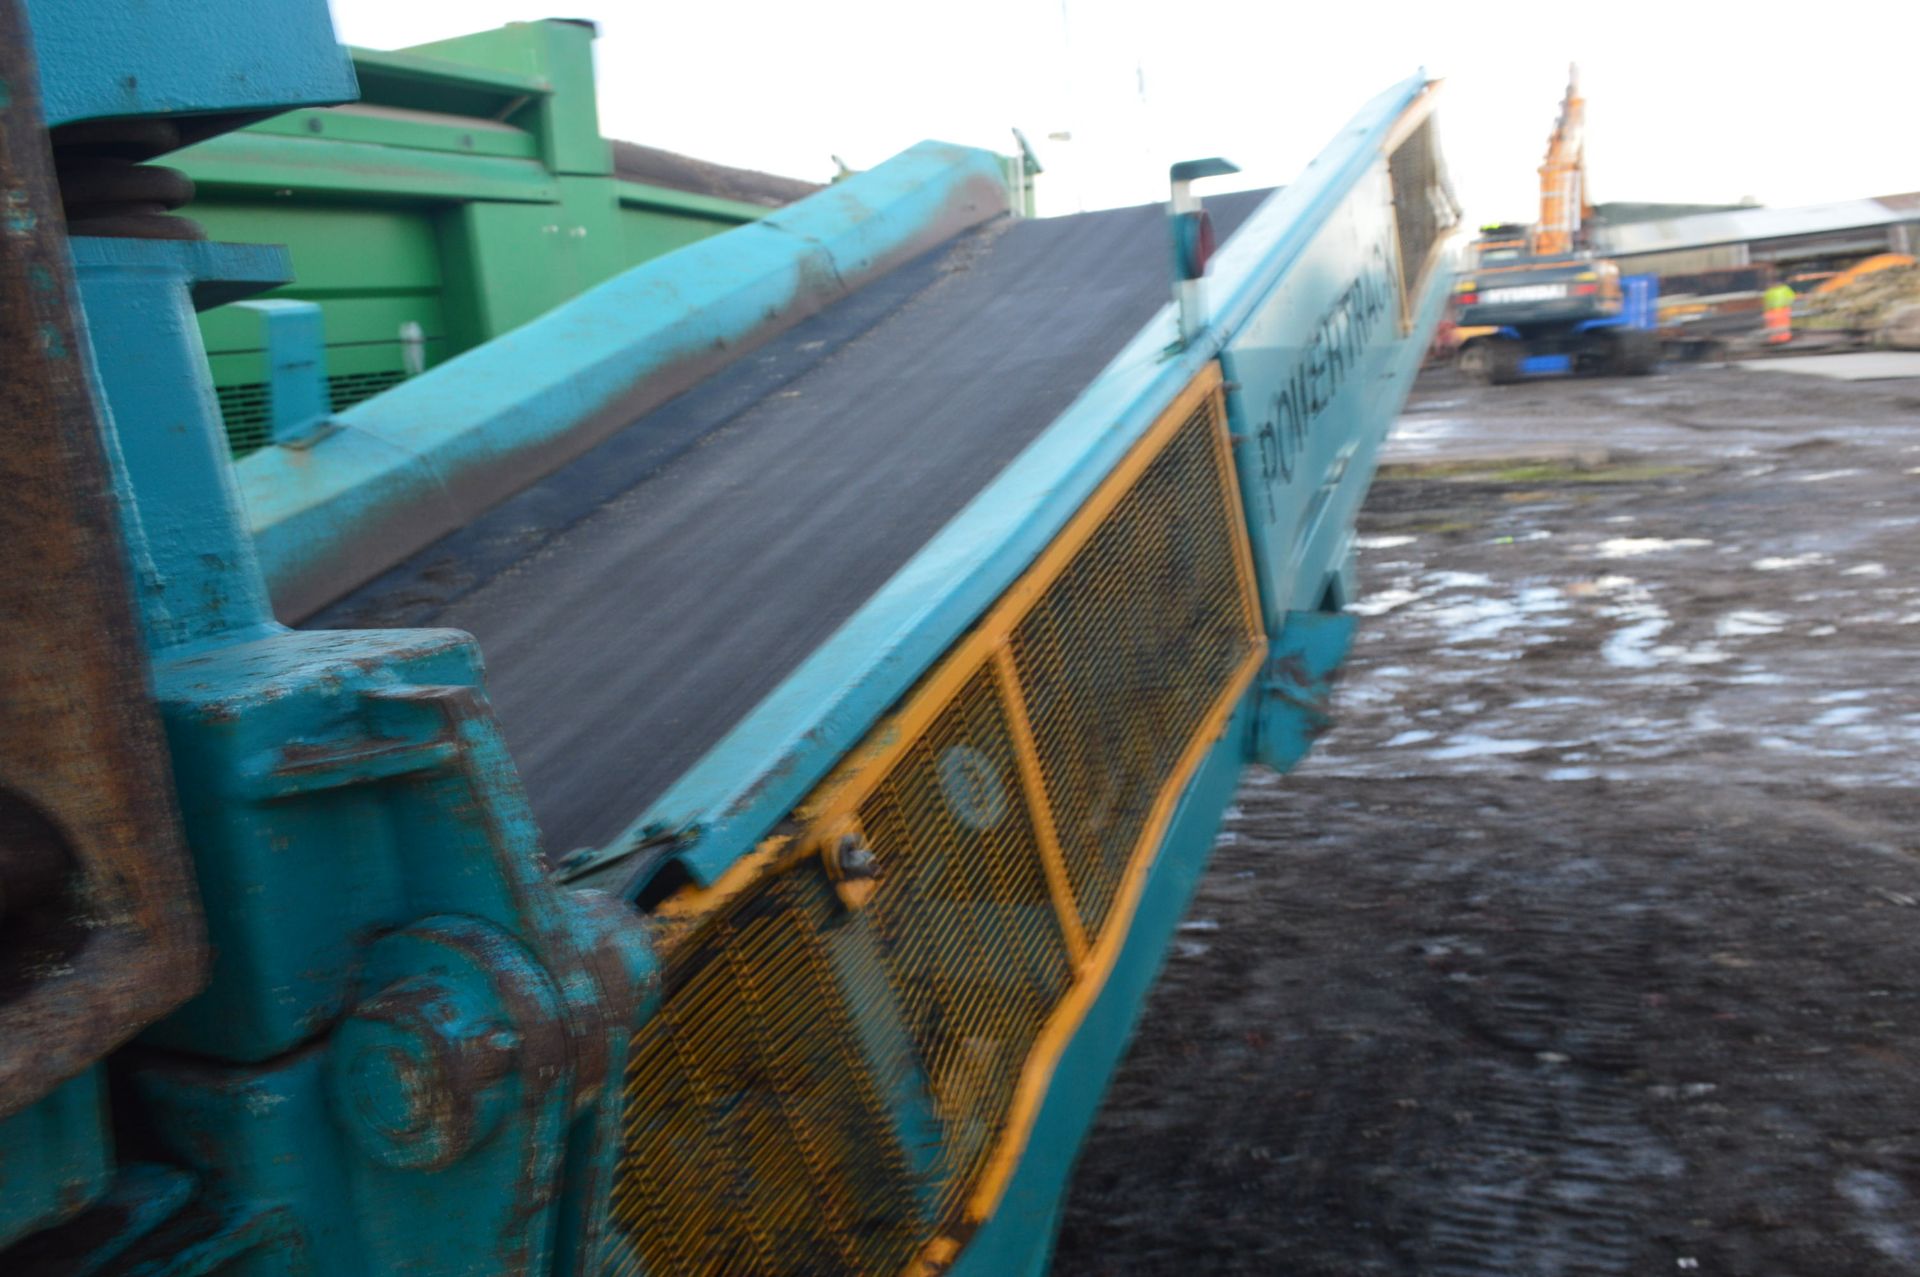 Powerscreen POWER TRACK MOUNTED AGGREGATE SCREEN, serial no. 72 15 651, indicated hours 8429 (at - Image 7 of 7